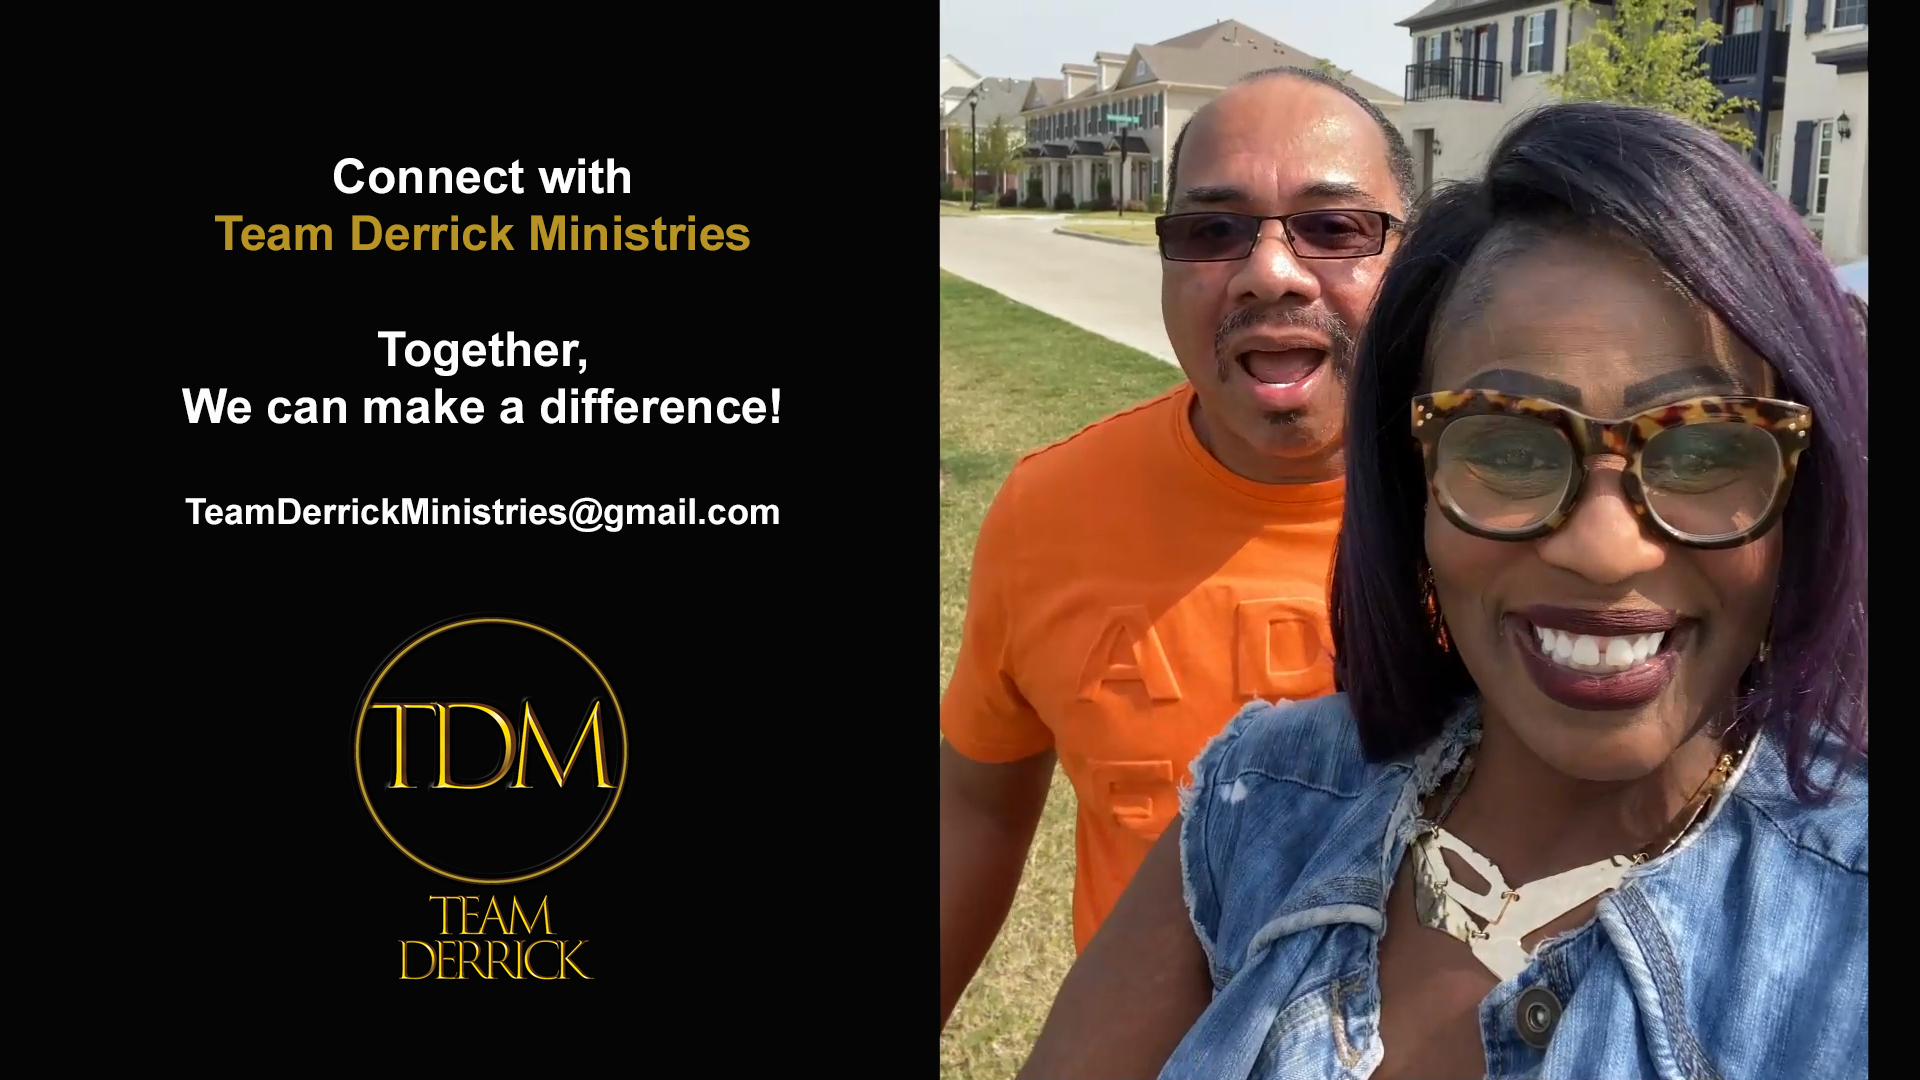 Connect & Partner with Team Derrick